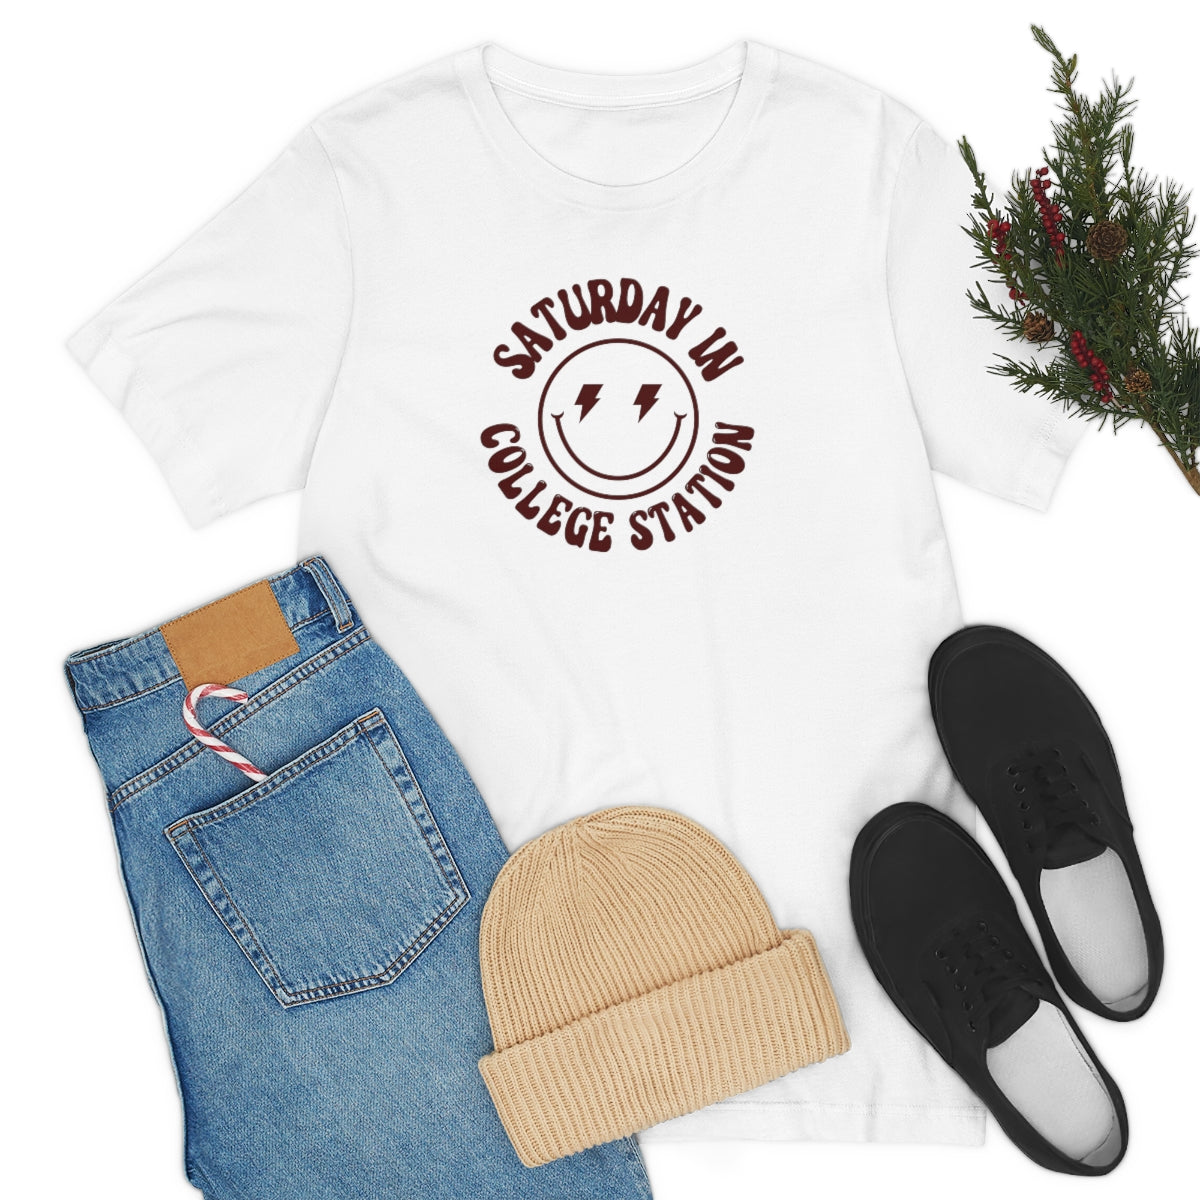 Smiley College Station Short Sleeve Tee - GG